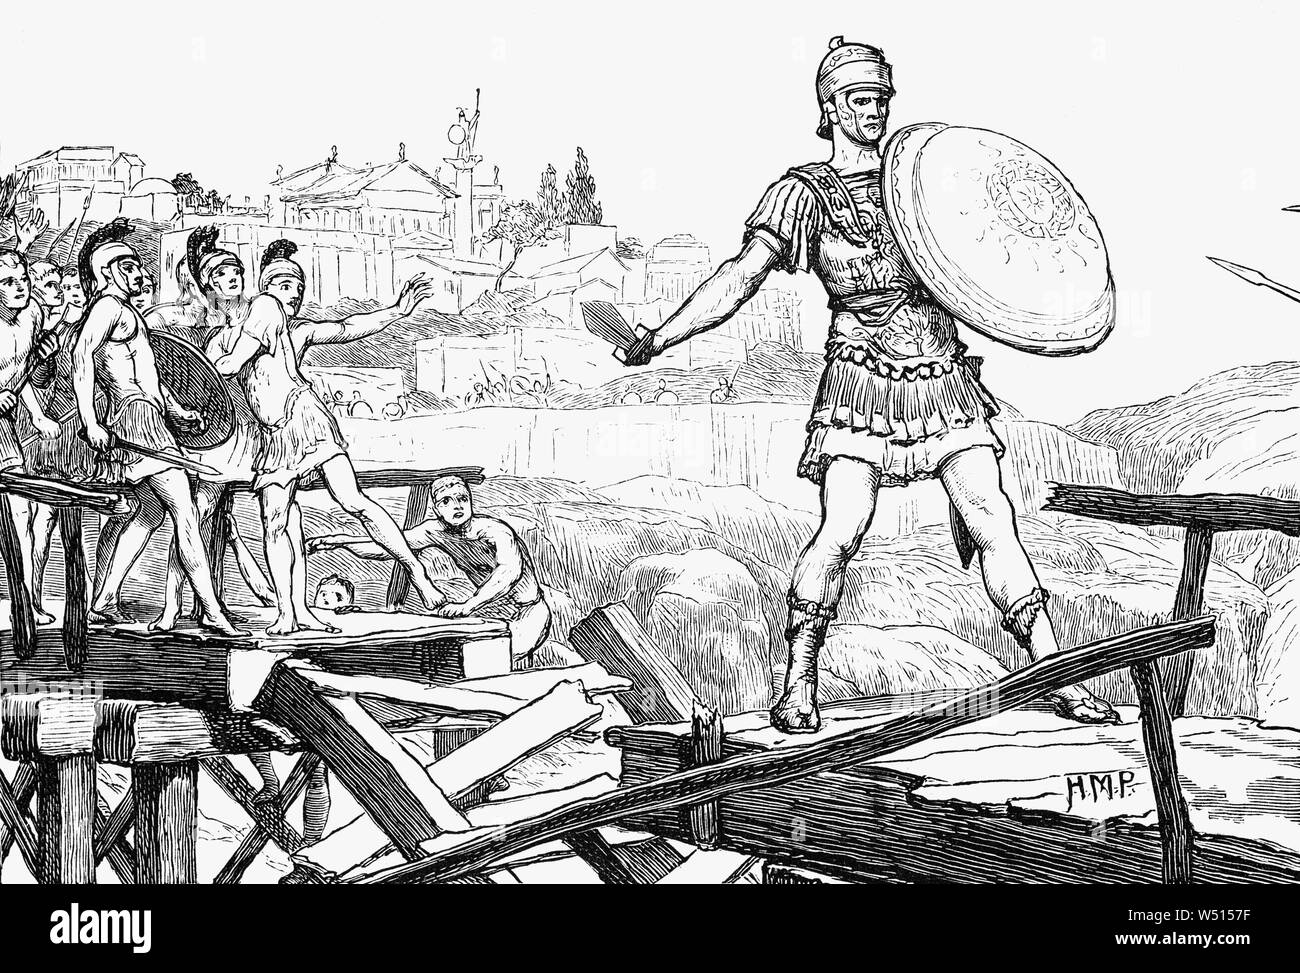 Publius Horatius Cocles was an officer in the army of the early Roman Republic who famously defended the Pons Sublicius, from the invading army of Etruscan King Lars Porsena of Clusium in the late 6th century BC, during the war between Rome and Clusium. By defending the narrow end of the bridge, the earliest known bridge of ancient Rome, spanning the Tiber River, he—along with two others—was able to hold off the attacking army long enough to allow other Romans to destroy the bridge behind him, blocking the Etruscans' advance and saving the city. Stock Photo